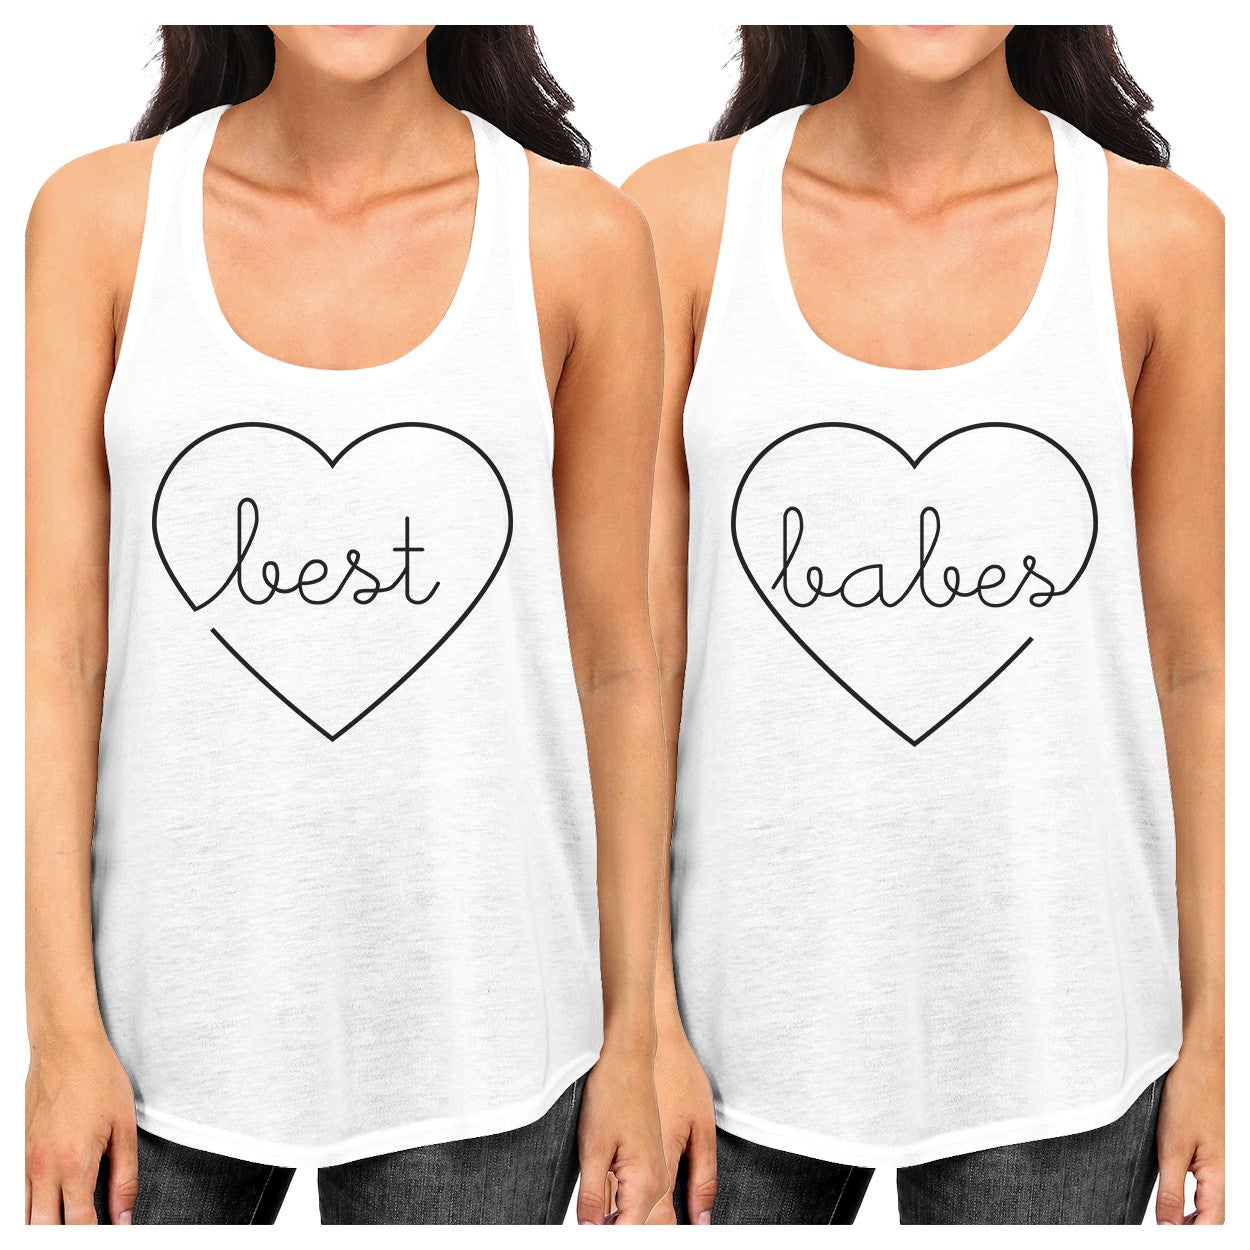 Best Babes BFF Matching White Tank Tops